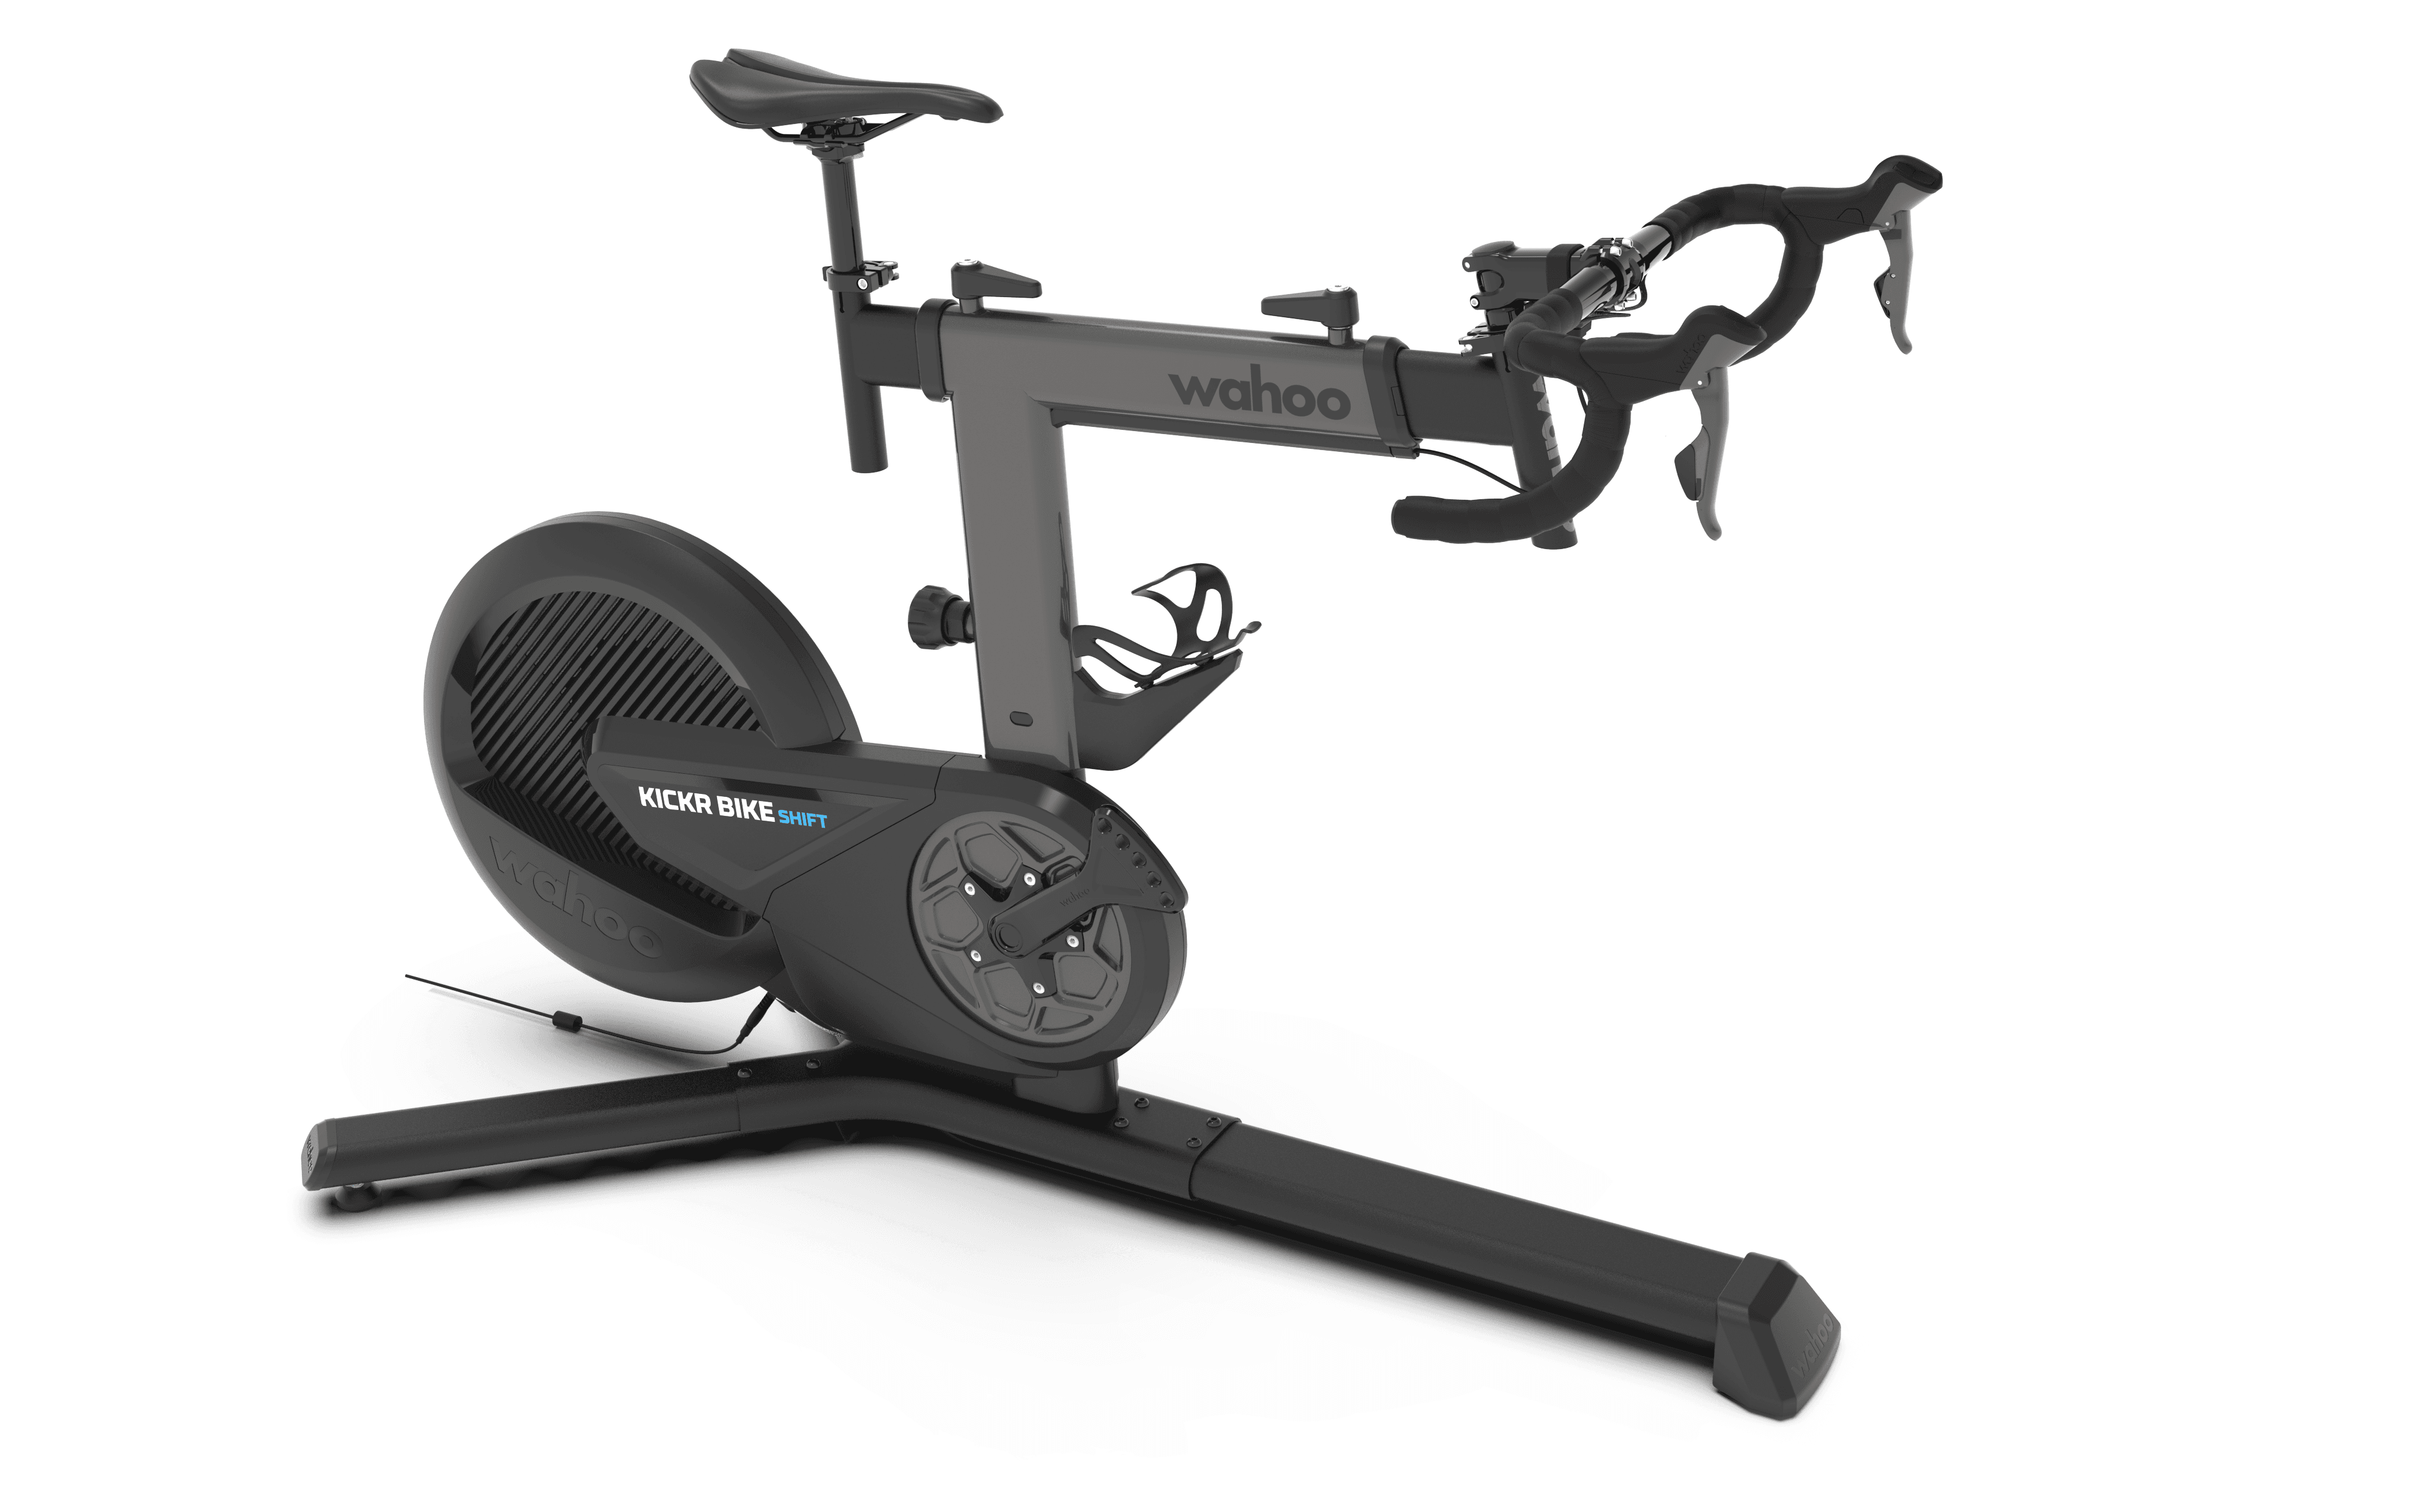 The KICKR BIKE SHIFT comes at a lower price point then the original KICKR bike. It still offers a lot of features!